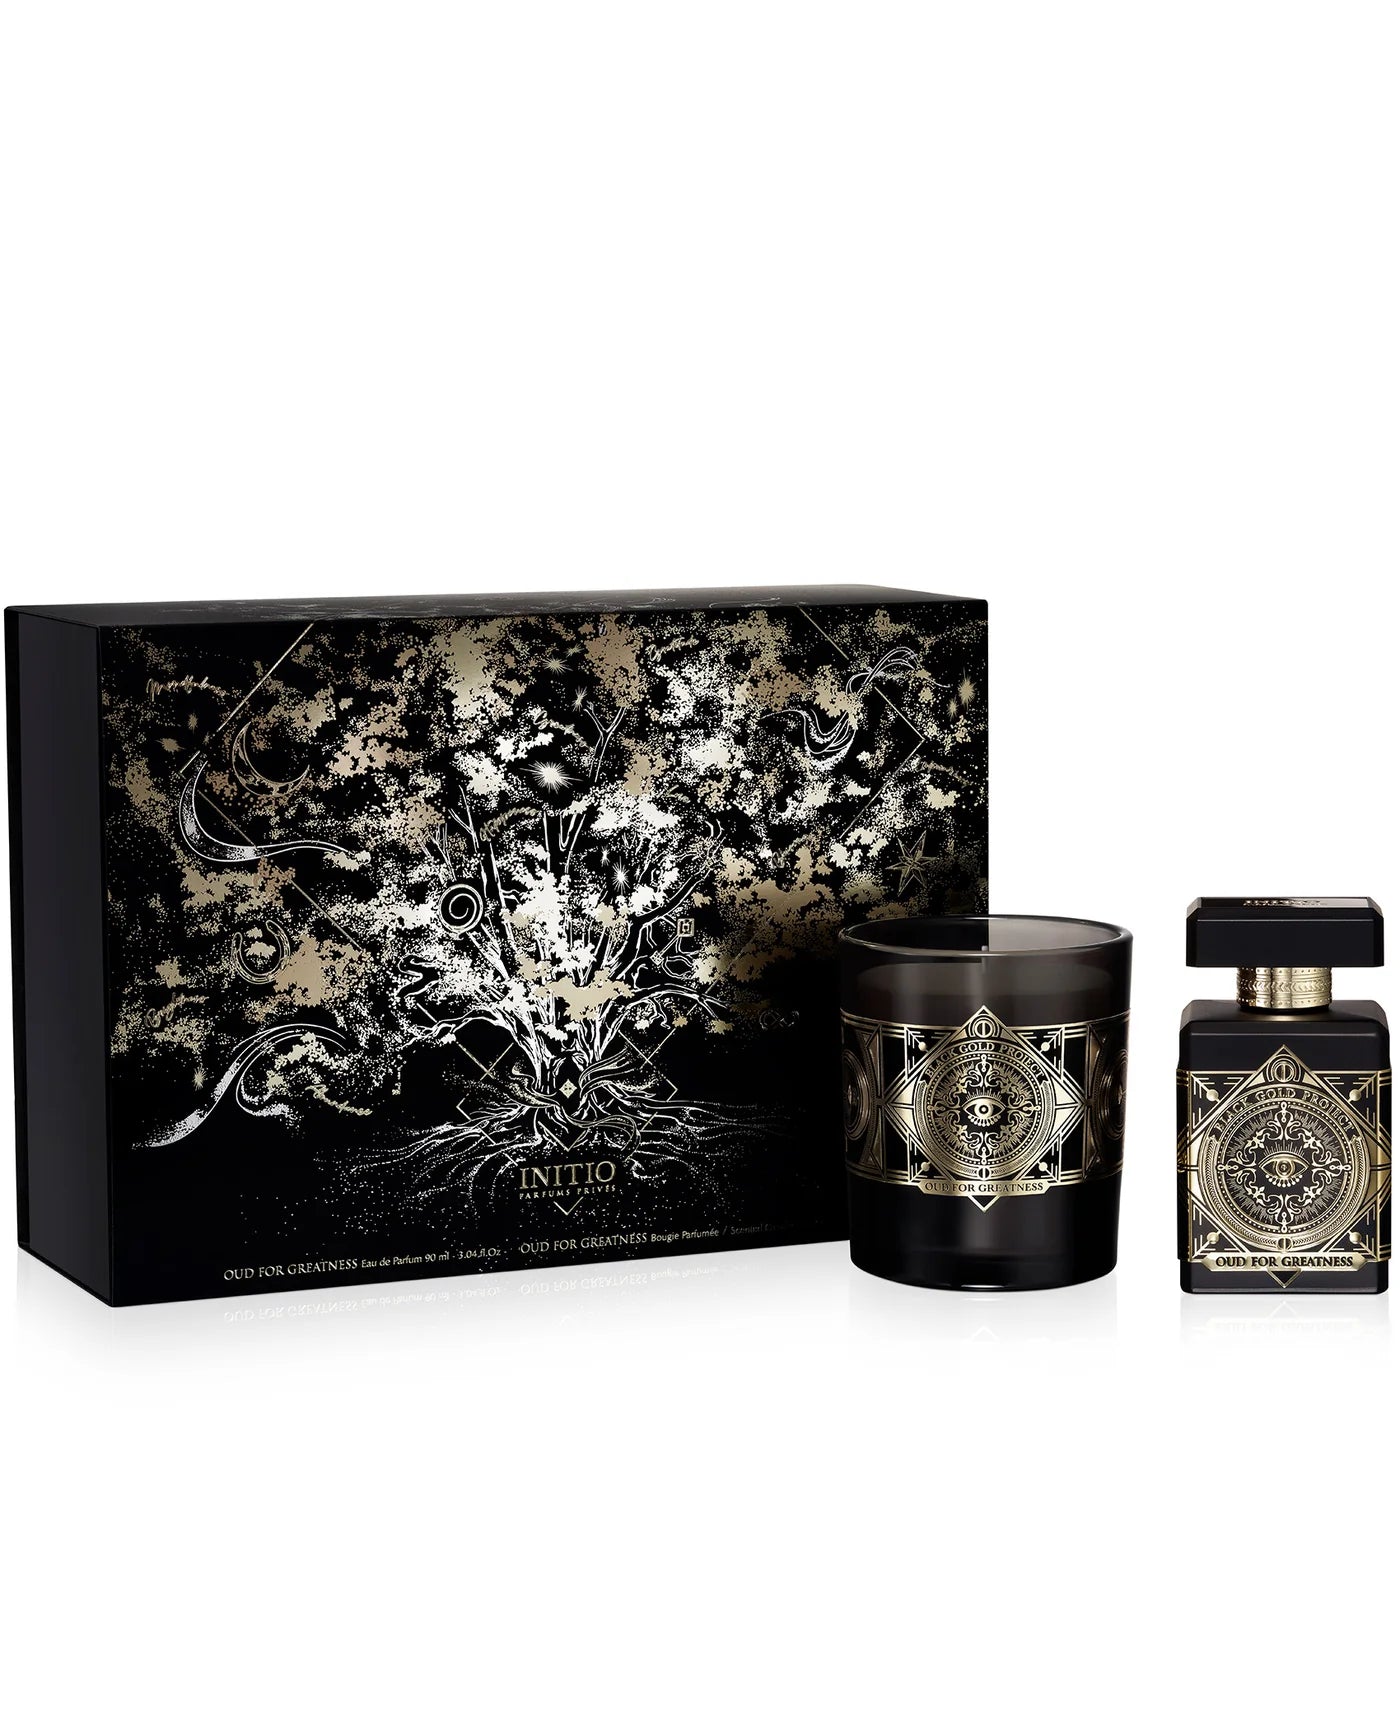 Initio Oud For Greatness Perfume &amp; Candle Limited Edition Set